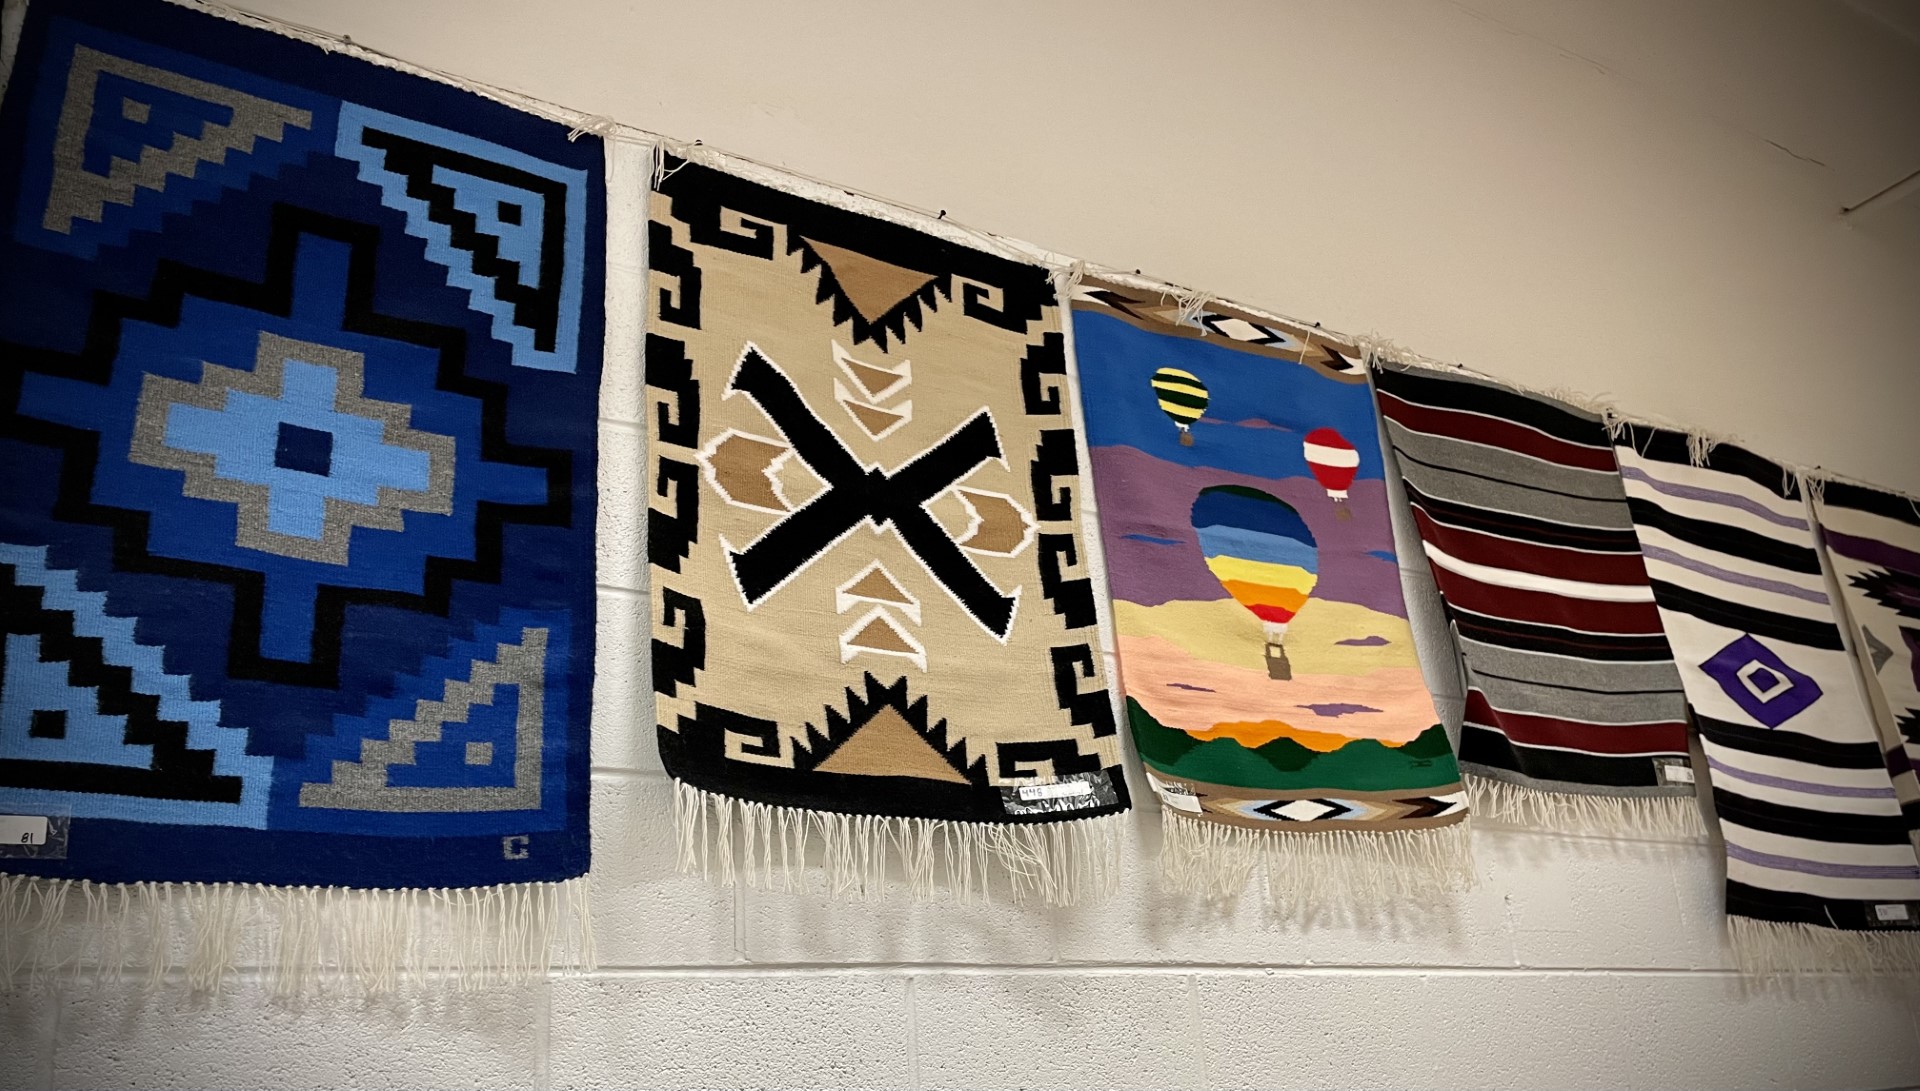 Woven rugs hung up on display